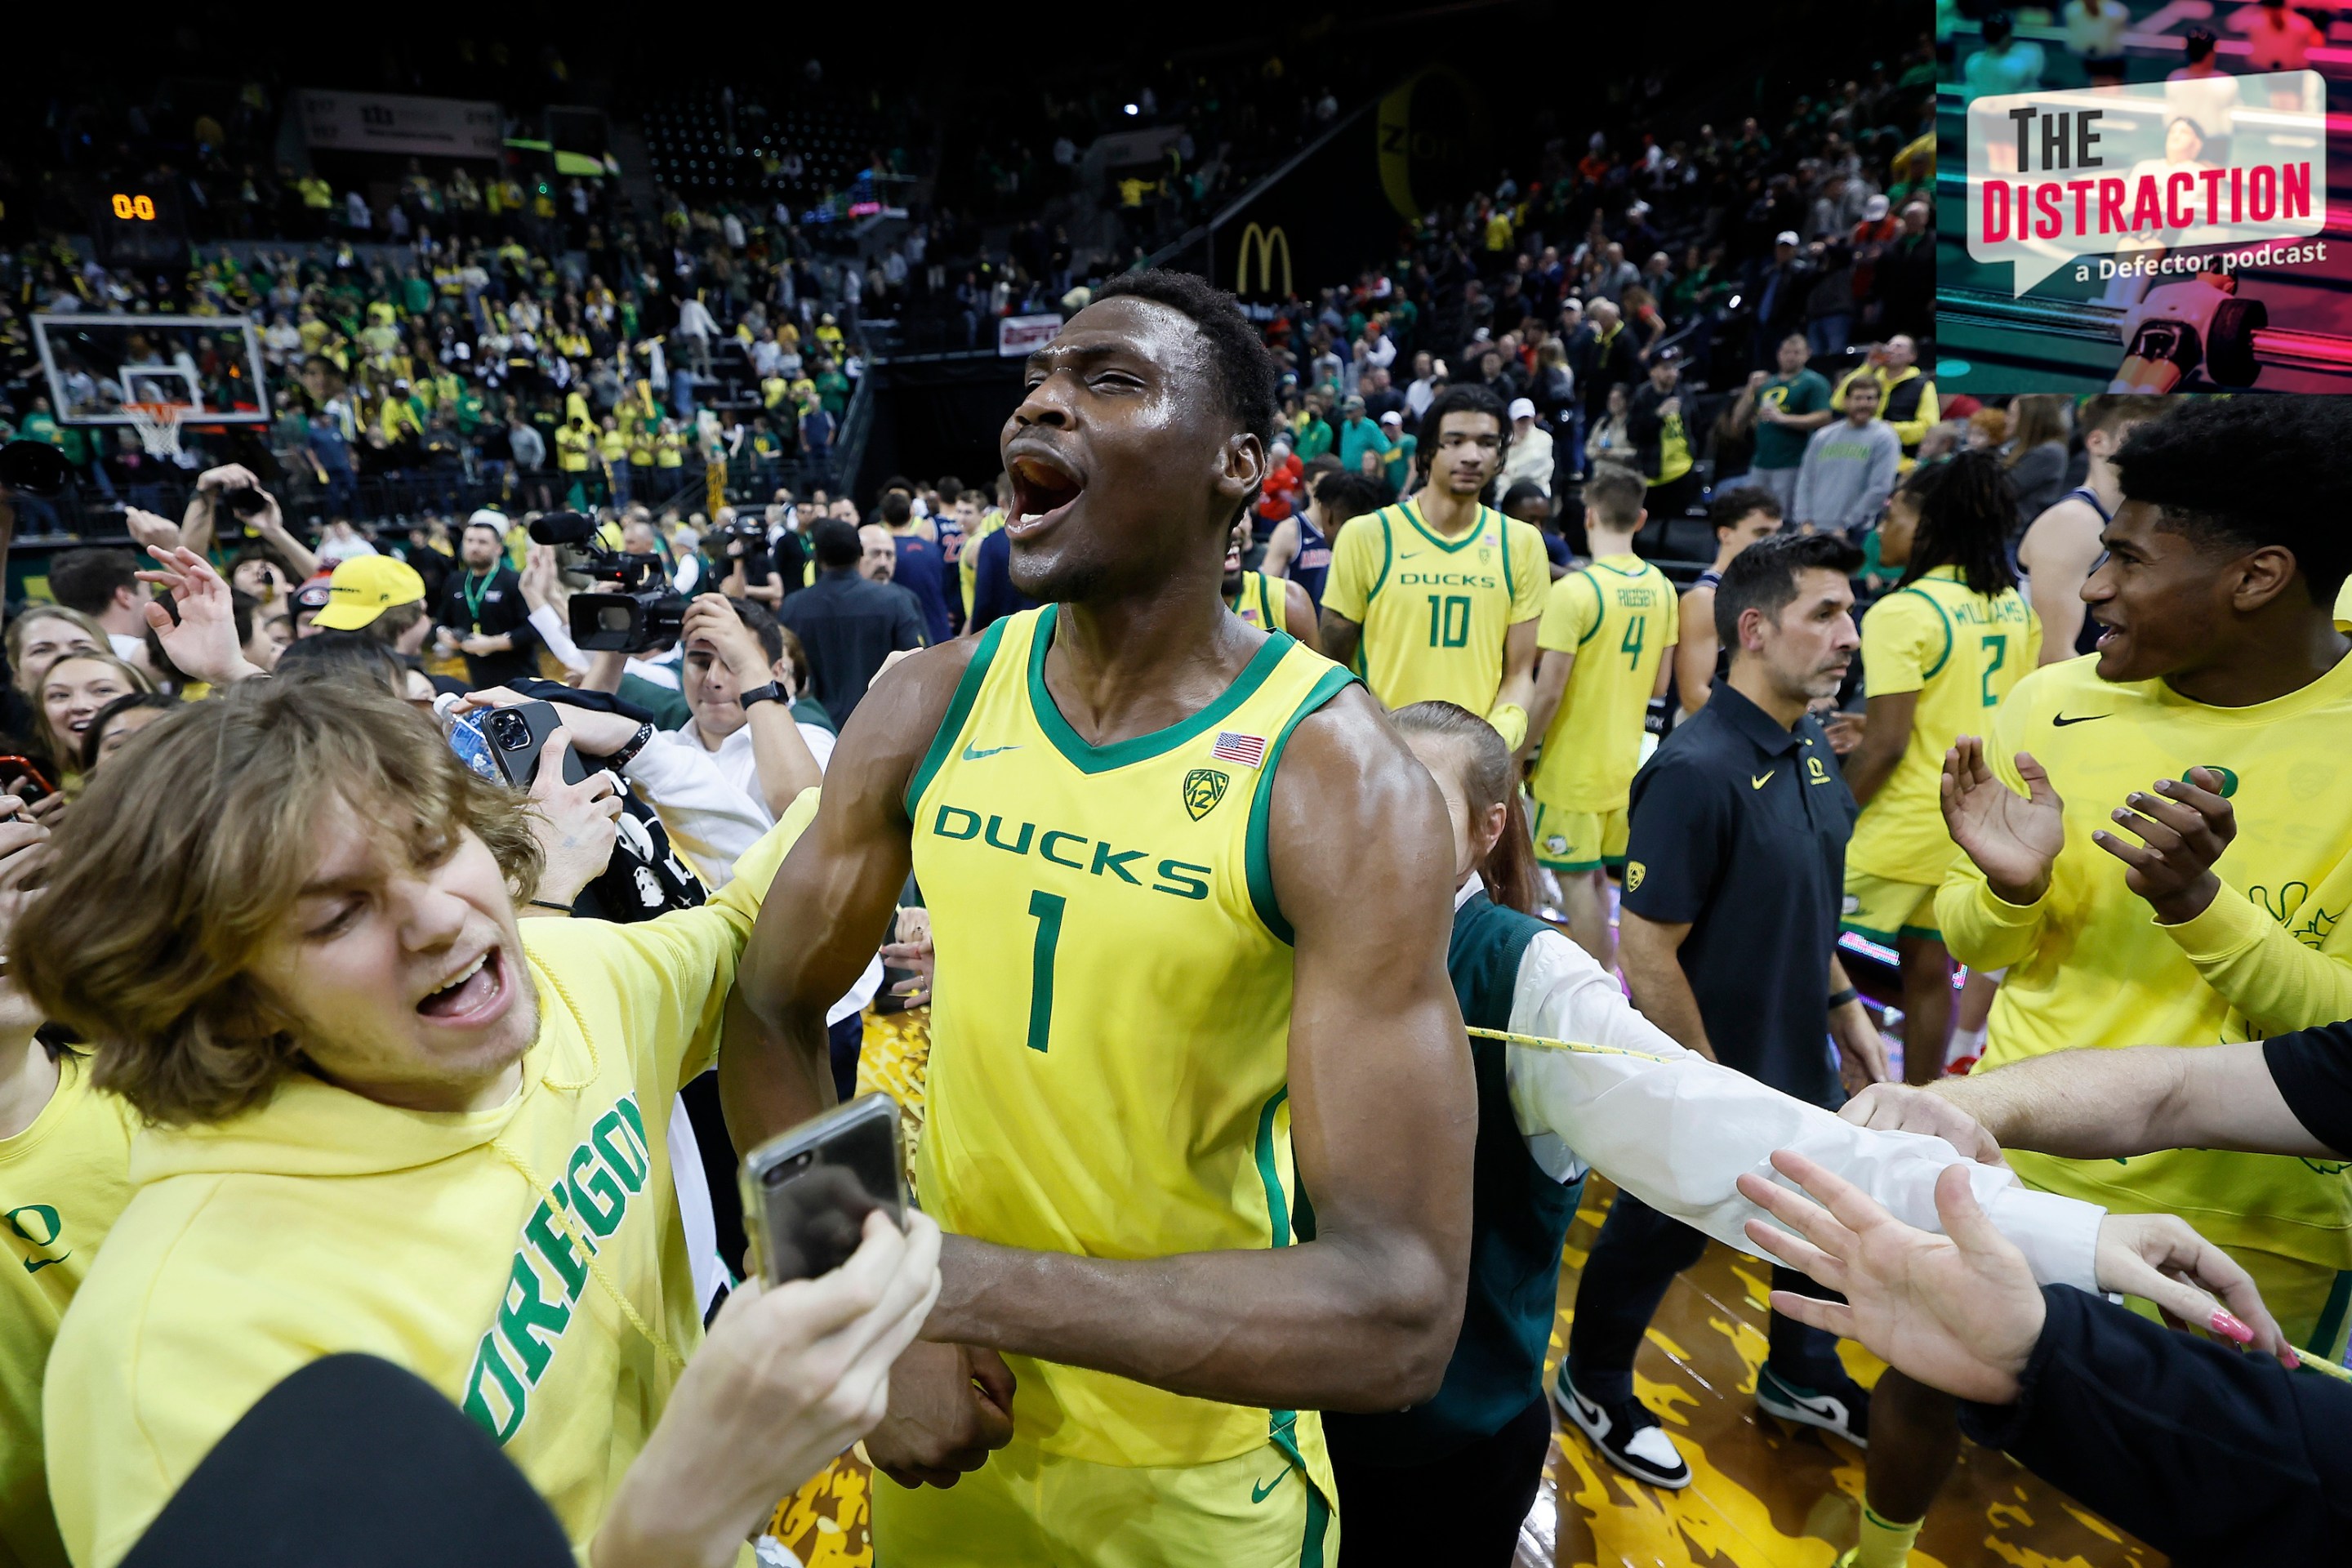 N'Faly Dante of the Oregon Ducks celebrates with fans after defeating the Arizona Wildcats at Matthew Knight Arena on January 14, 2023 in Eugene, Oregon.